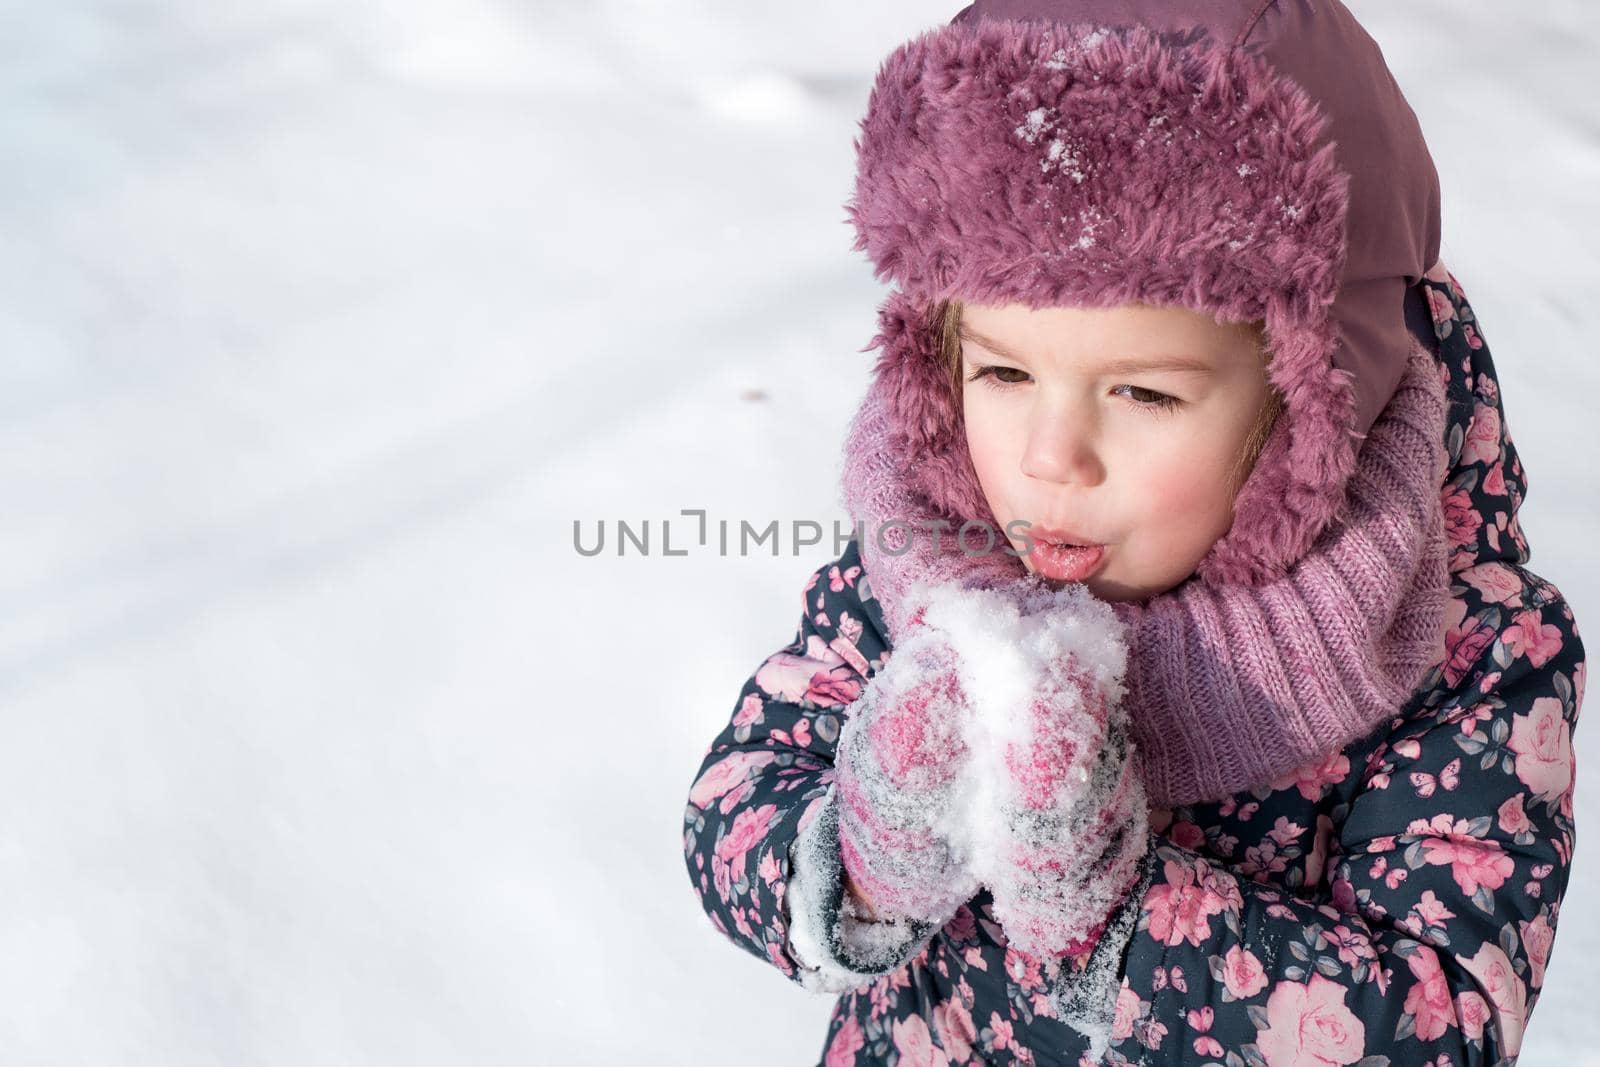 Winter, games, family, childhood concepts - close-up portrait authentic little preschool minor 3-4 years girl in pink hat warm clothes have fun smiles in snowy frosty weather. Funny kid eat taste snow by mytrykau